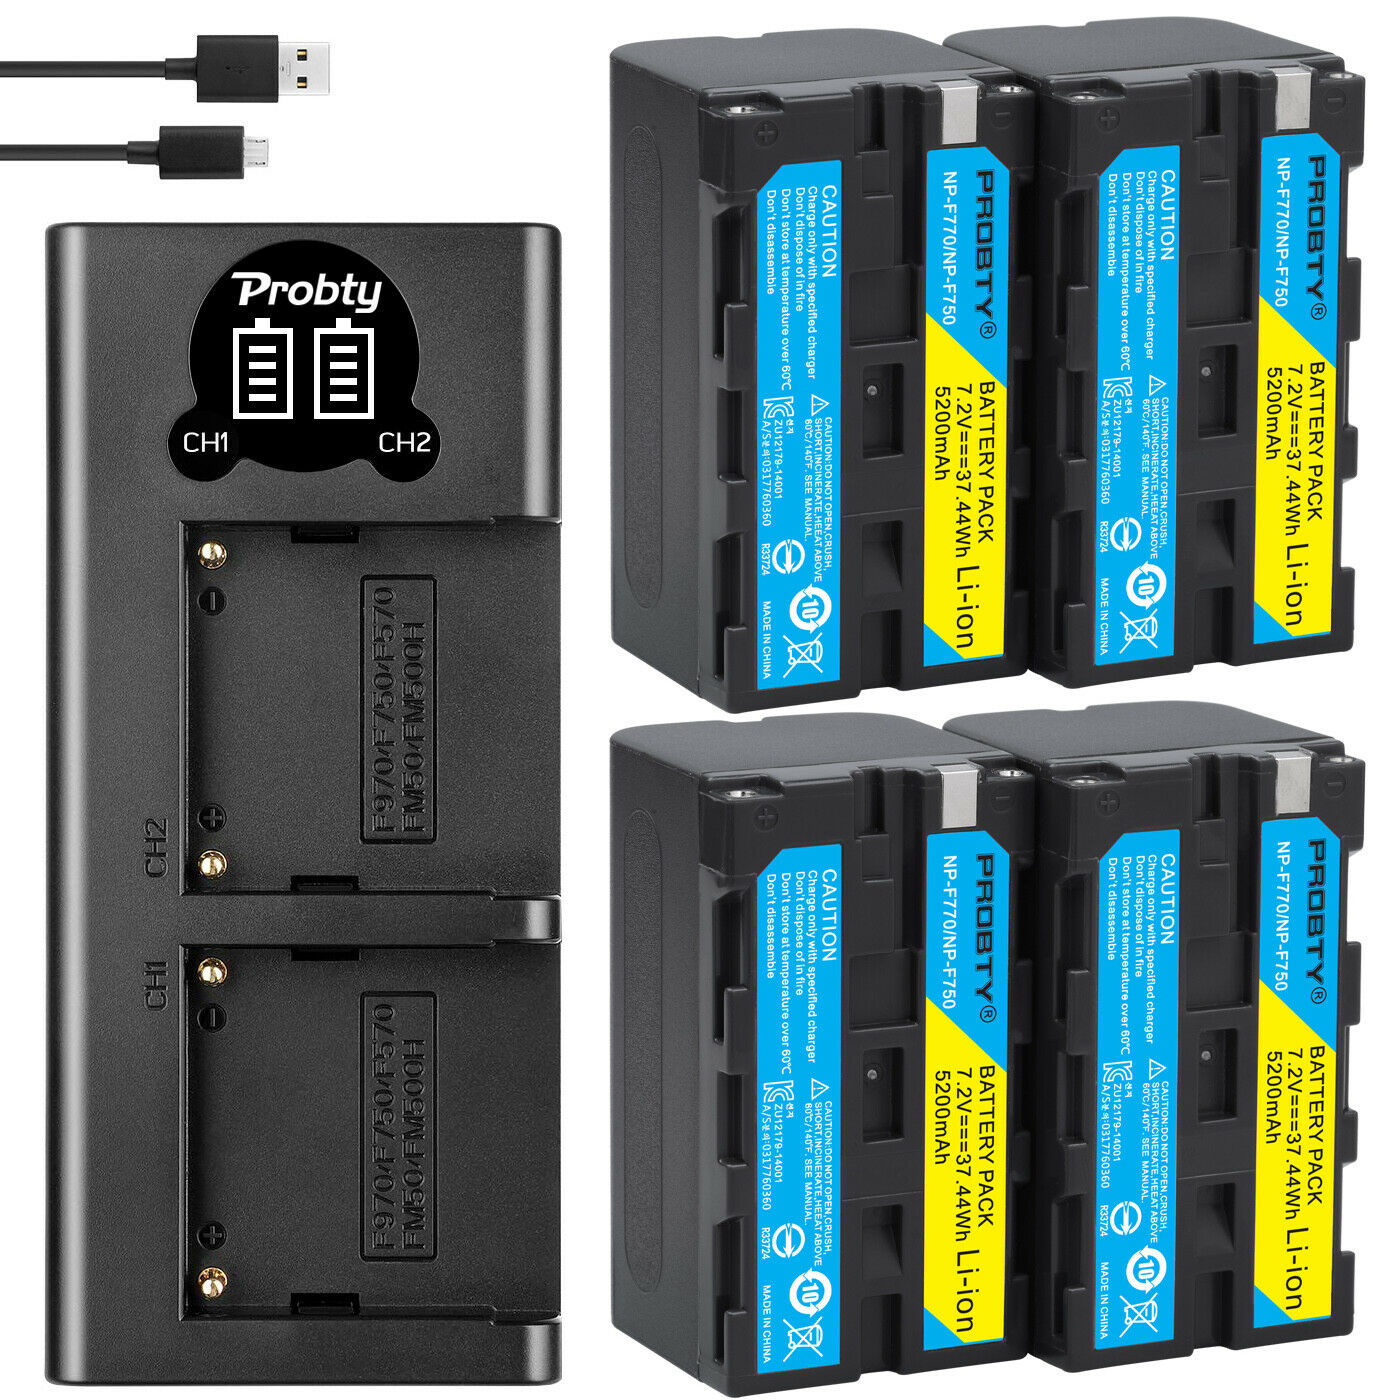 5200 Mah NP-F770 NP-F750 Np F770 Np F750 NPF770 750 Batterij + Led Usb Charger Voor Sony NP-F550 NP-F770 NP-F750 f960 F970